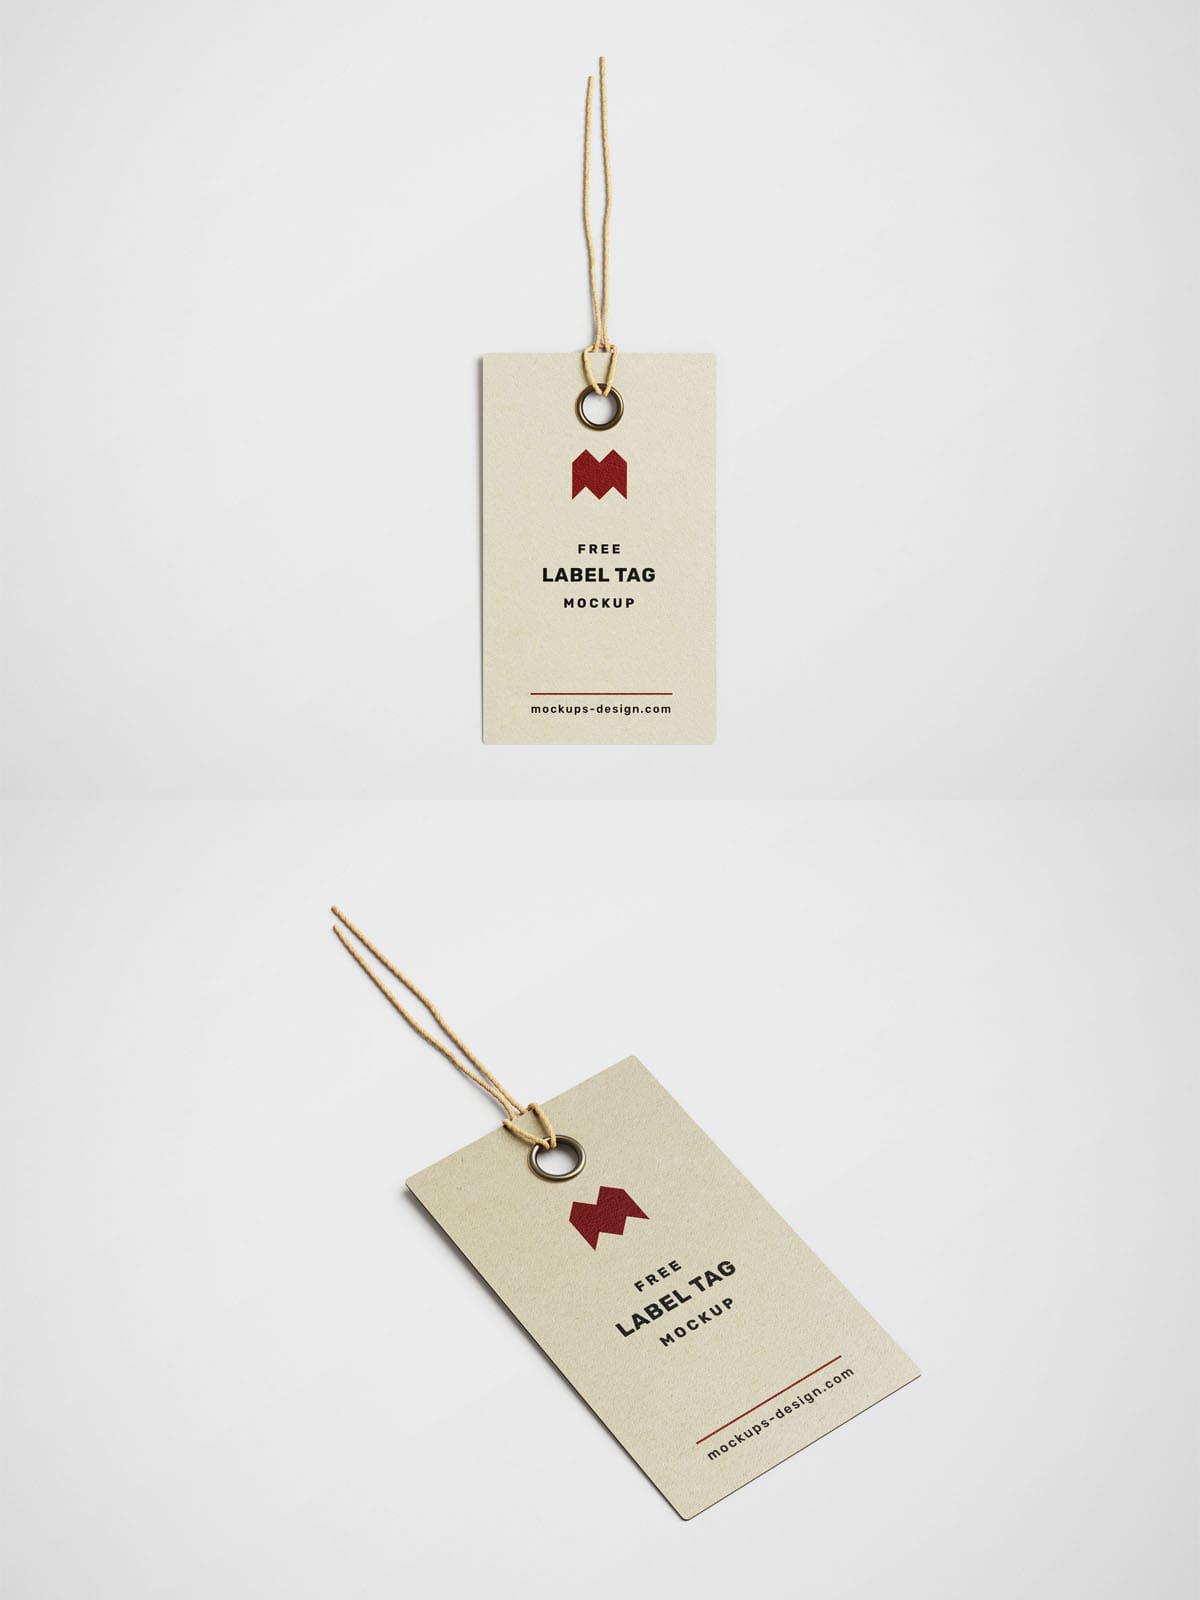 Download Free Label Tag PSD Mockup - Find the Perfect Creative Mockups Freebies to Showcase your Project ...